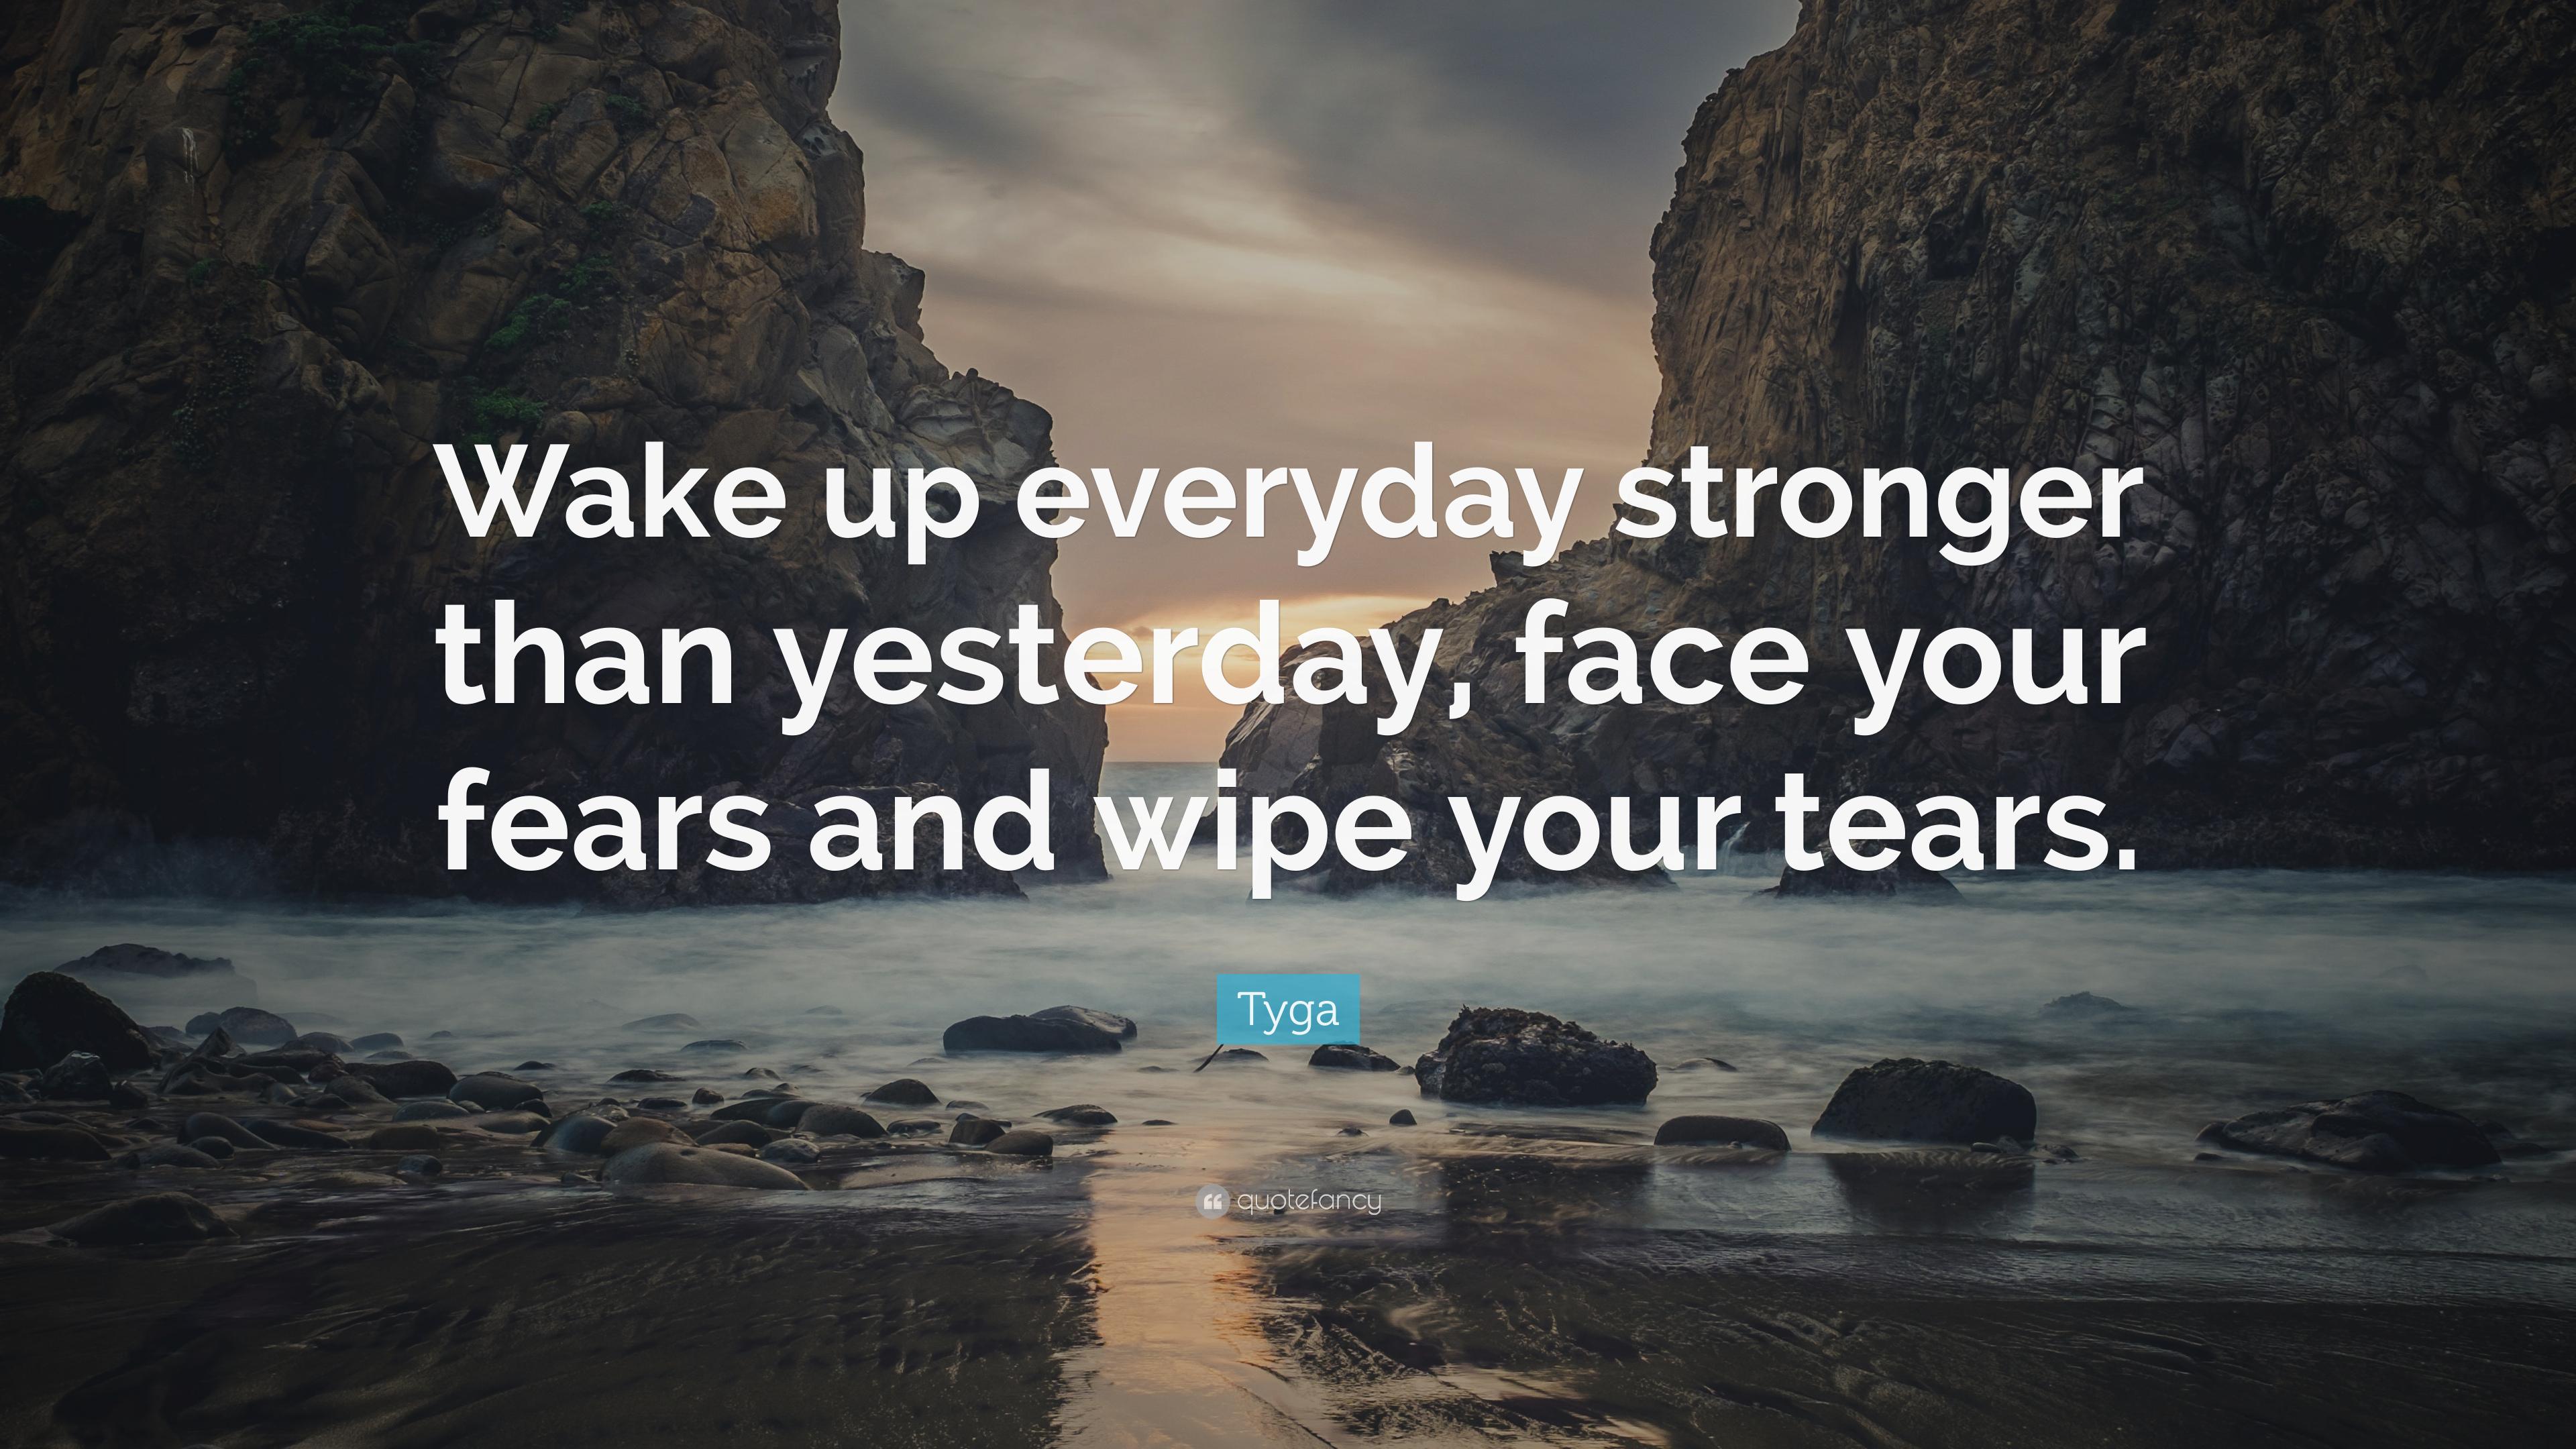 Tyga Quote: “Wake up everyday stronger than yesterday, face